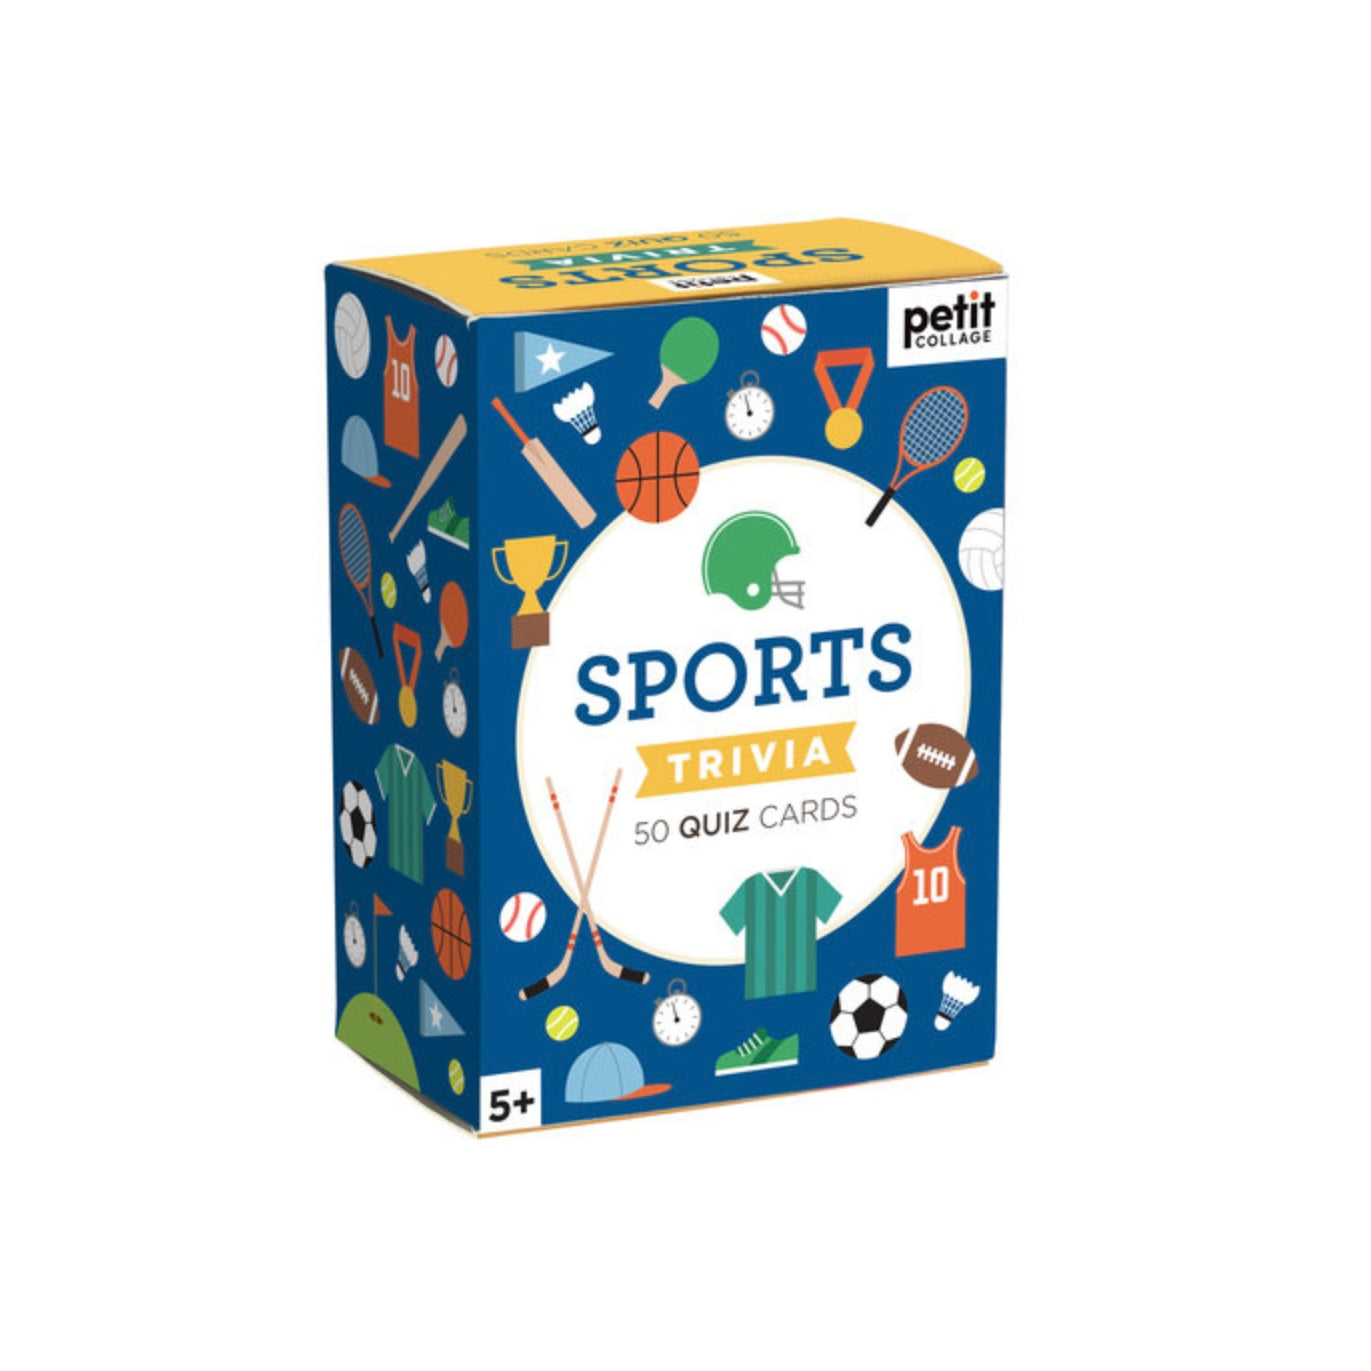 Sports Trivia with 50 Quiz Cards